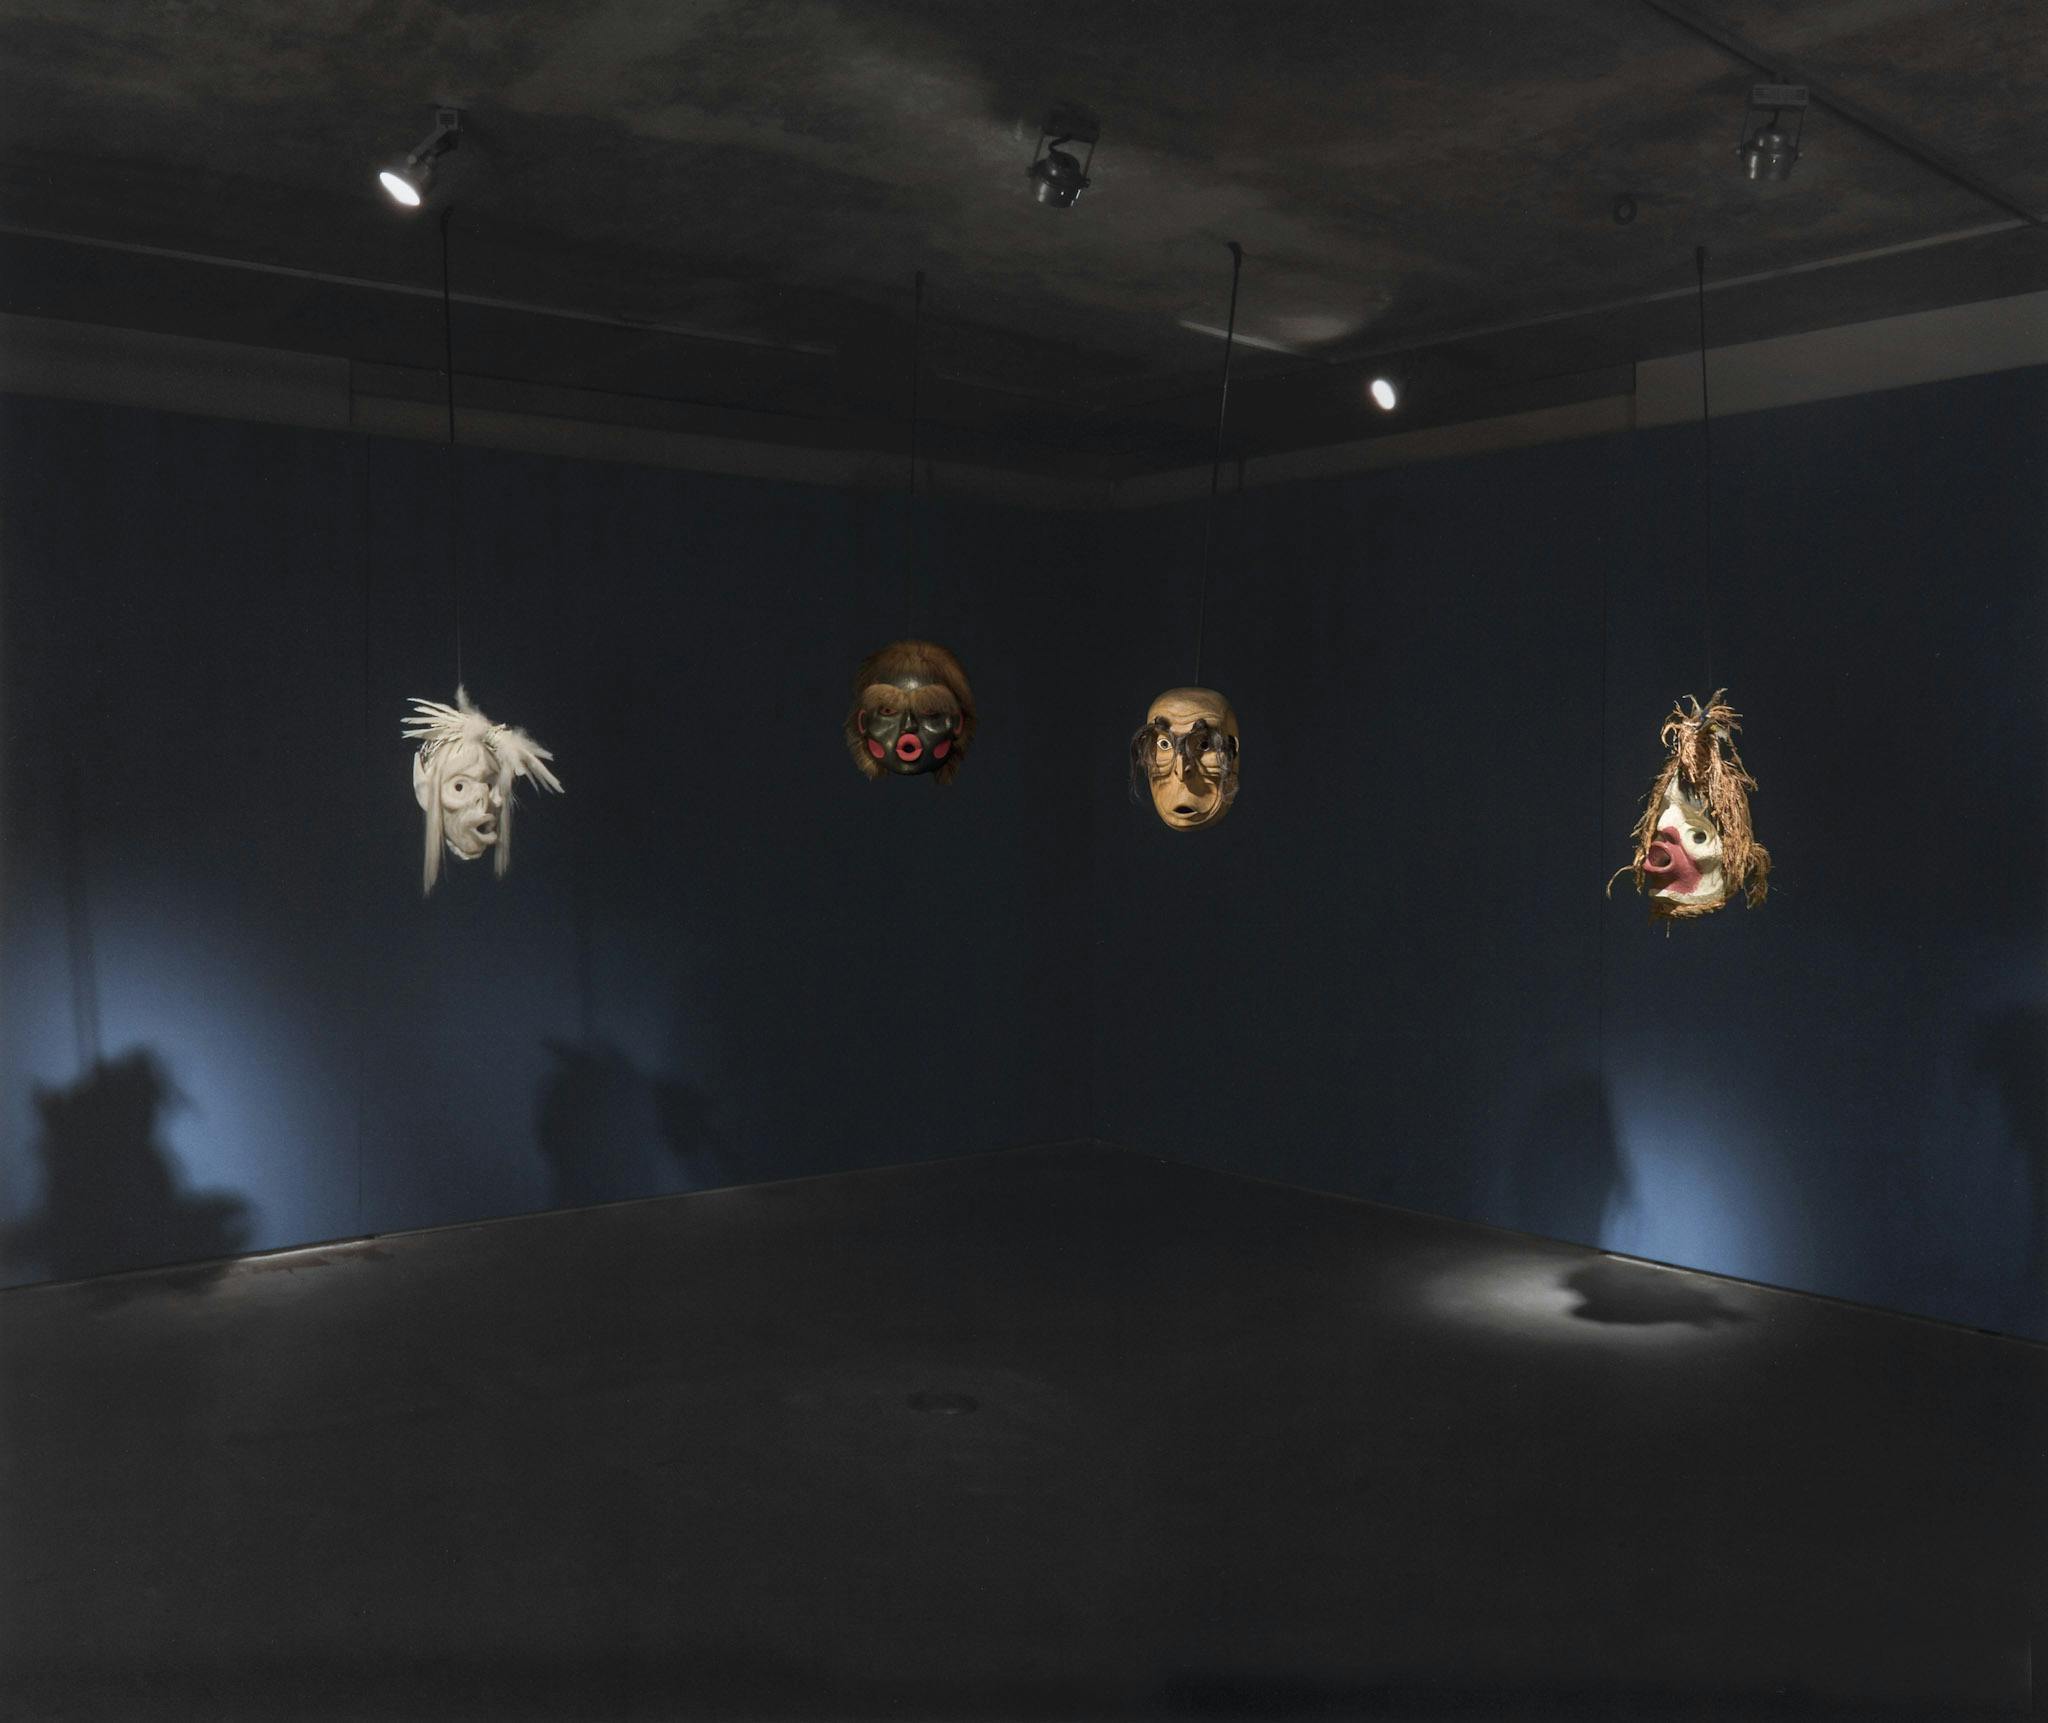 Installation image of four carved wood masks made by Beau Dick hanging in a gallery space. Each mask shows different faces with different facial expressions. The space is dimly lit and the walls are painted dark blue.